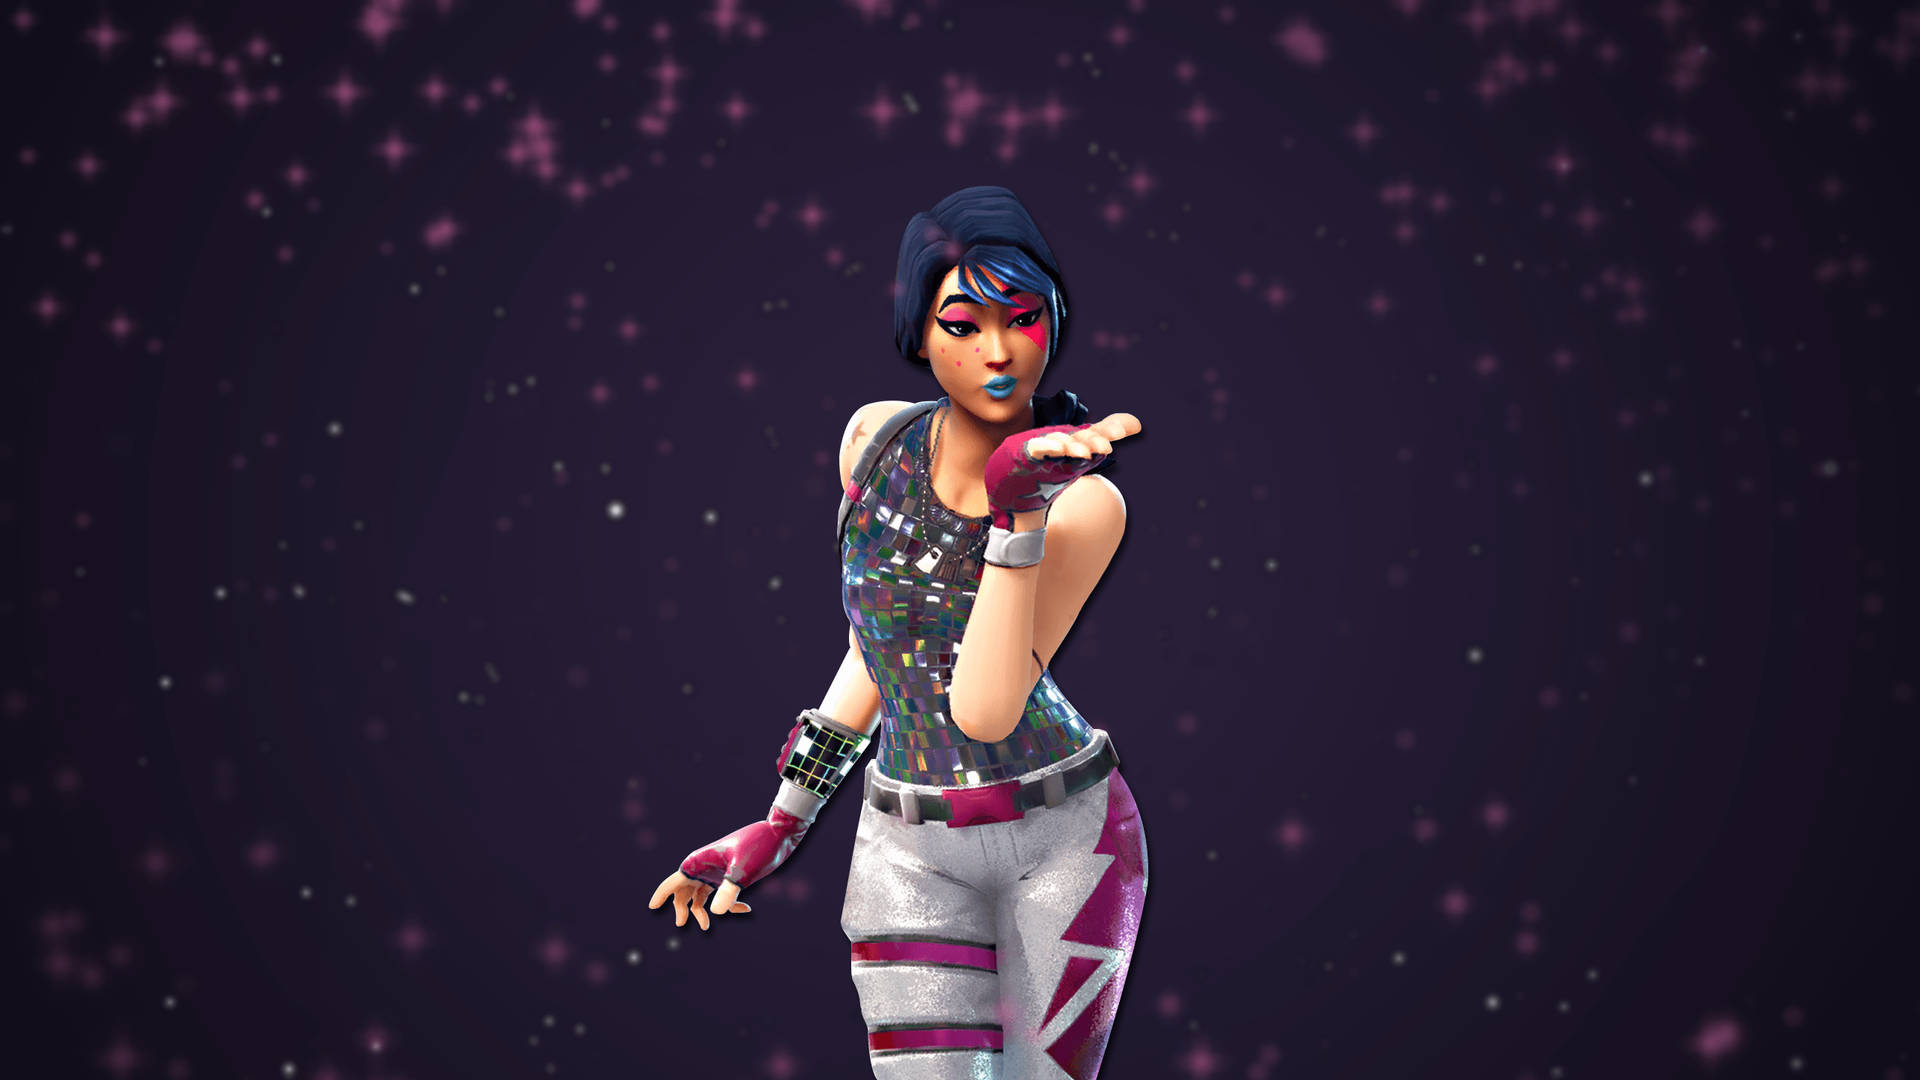 "sparkle Through The Battle, The Sparkle Specialist Skin From Fortnite." Wallpaper